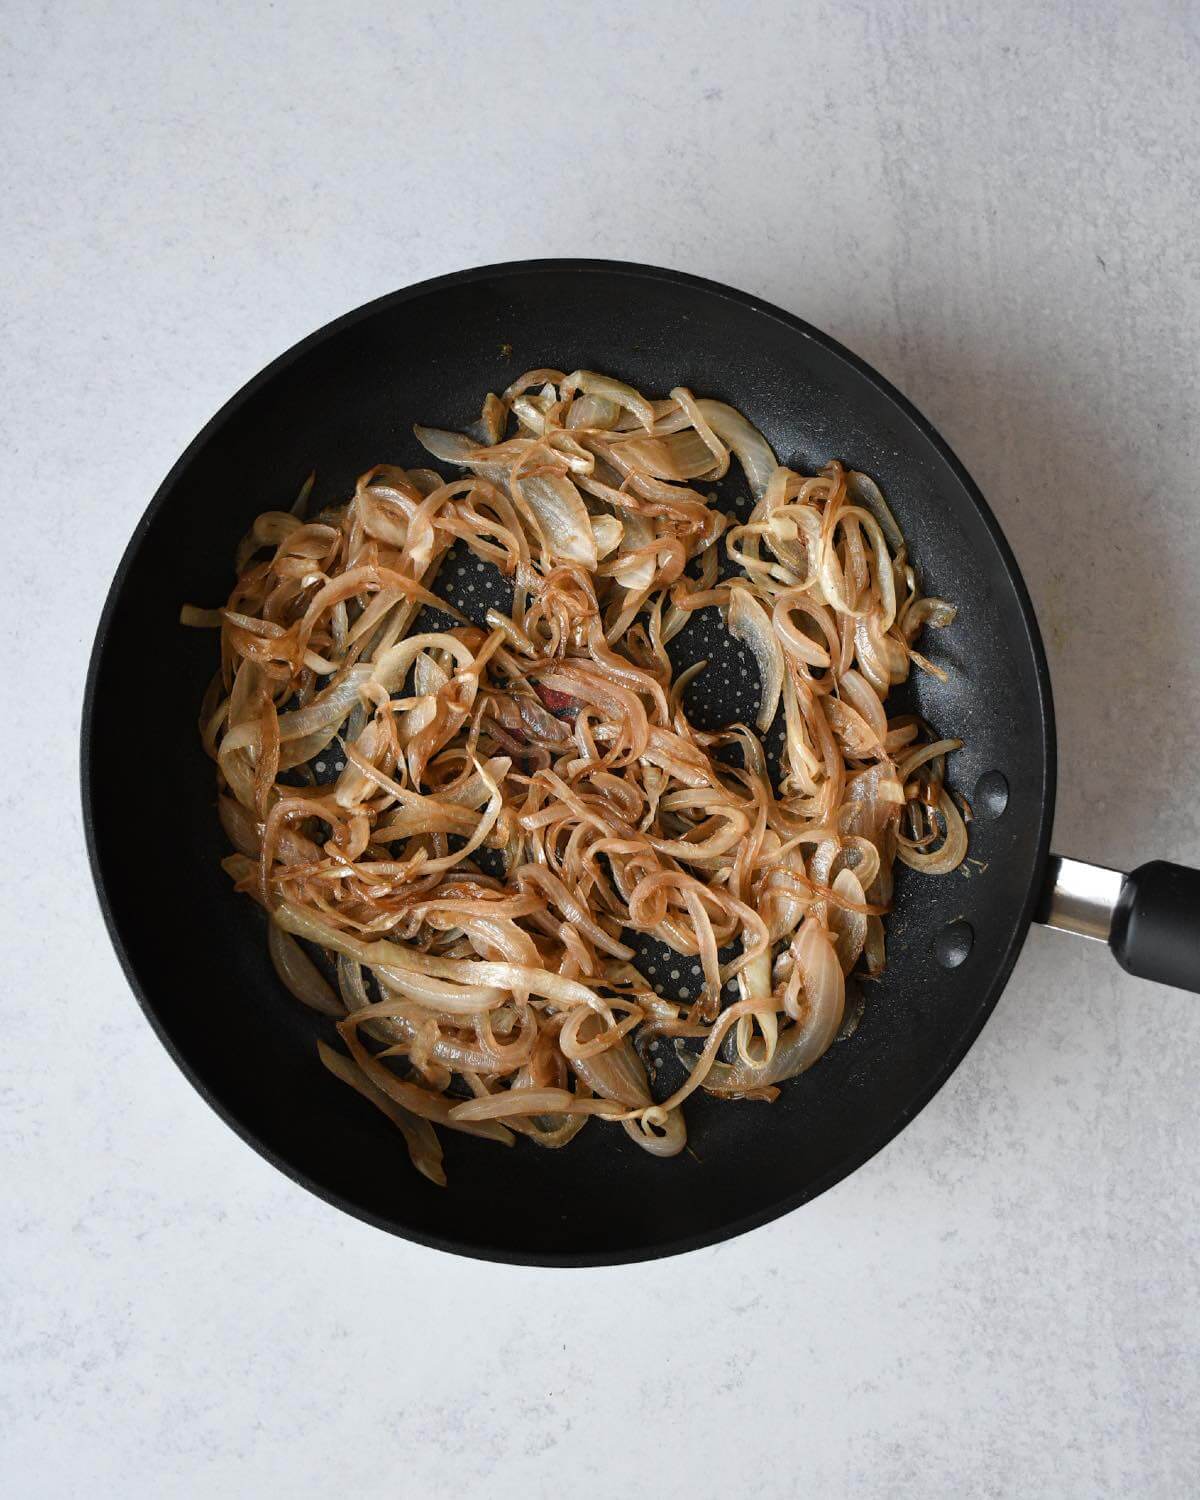 caramelized onions in a frying pan.